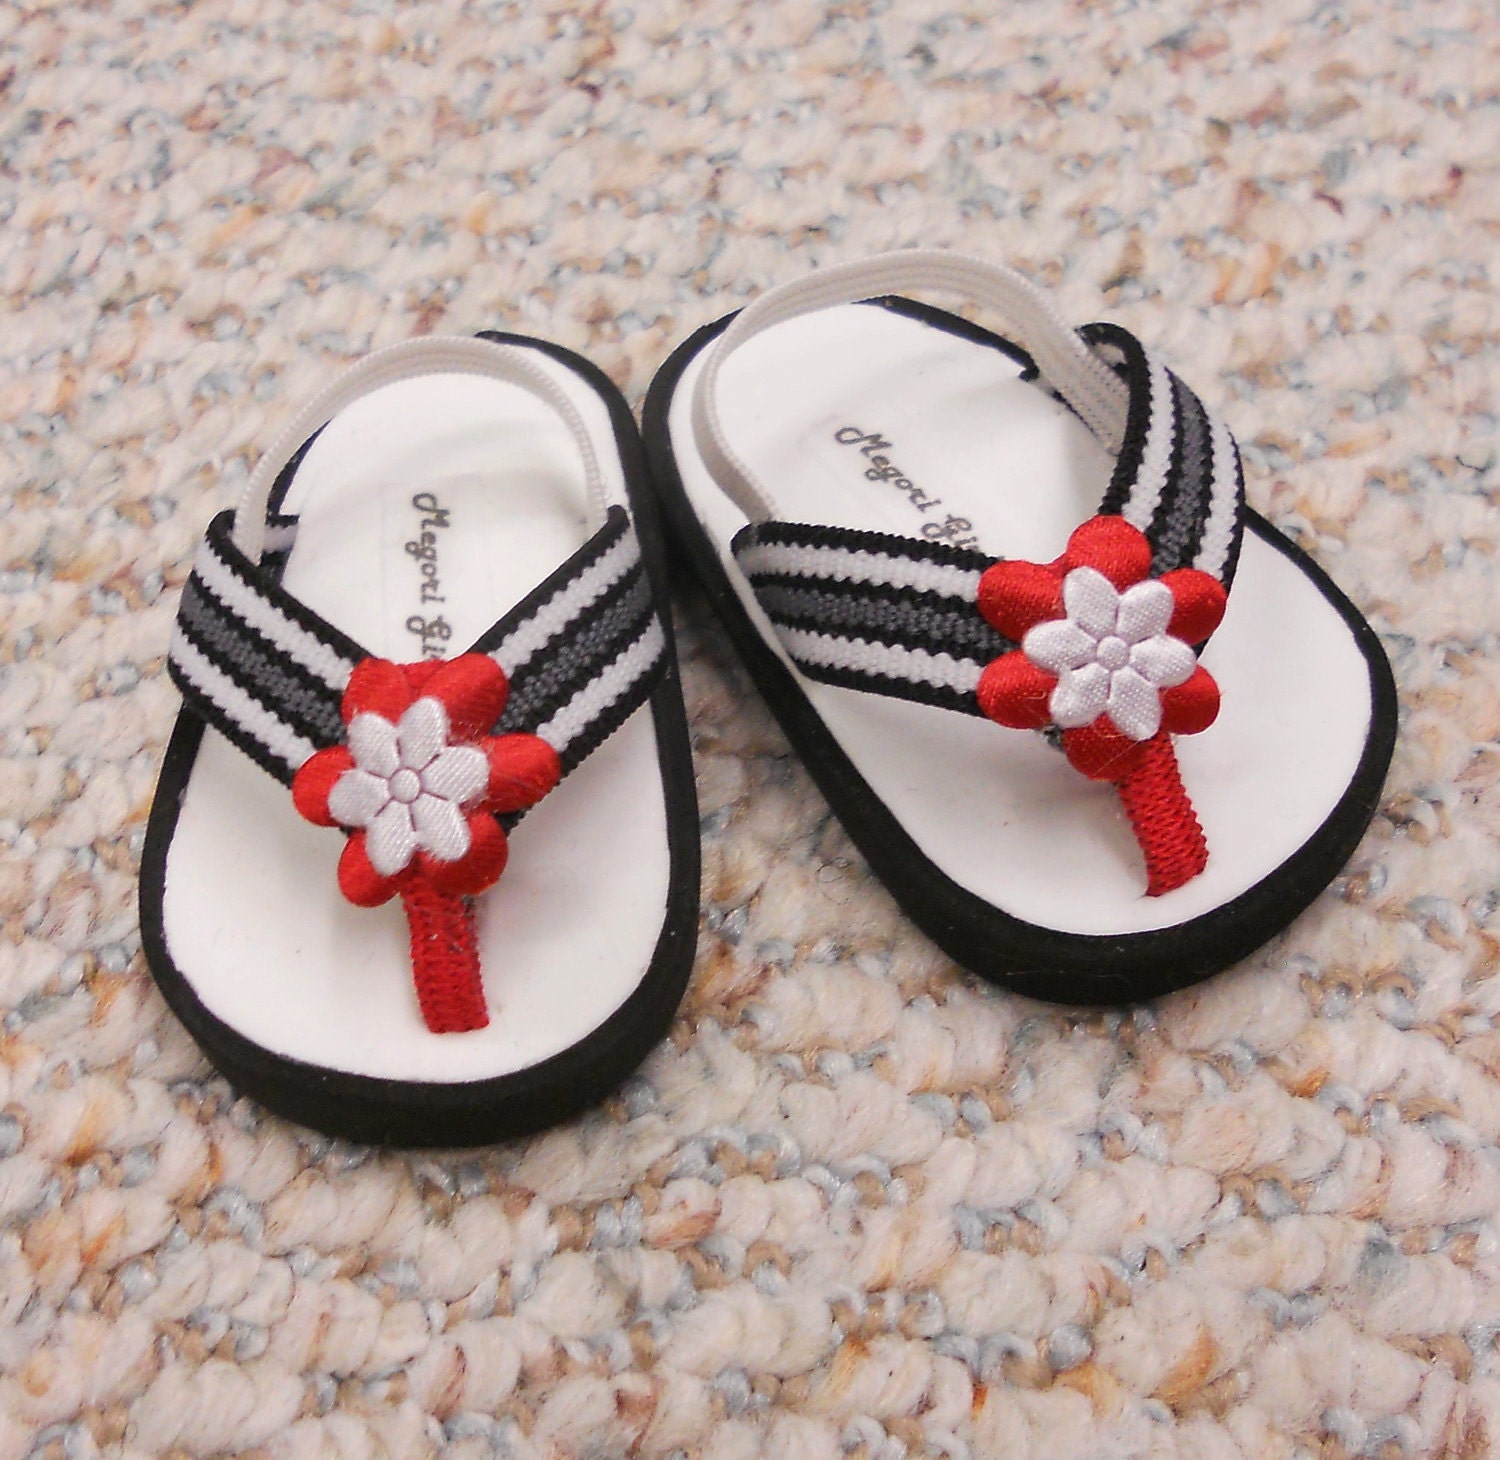 American Girl Shoes fits 18" Doll  Flip Flop Sandals  Black and White with Red Flower